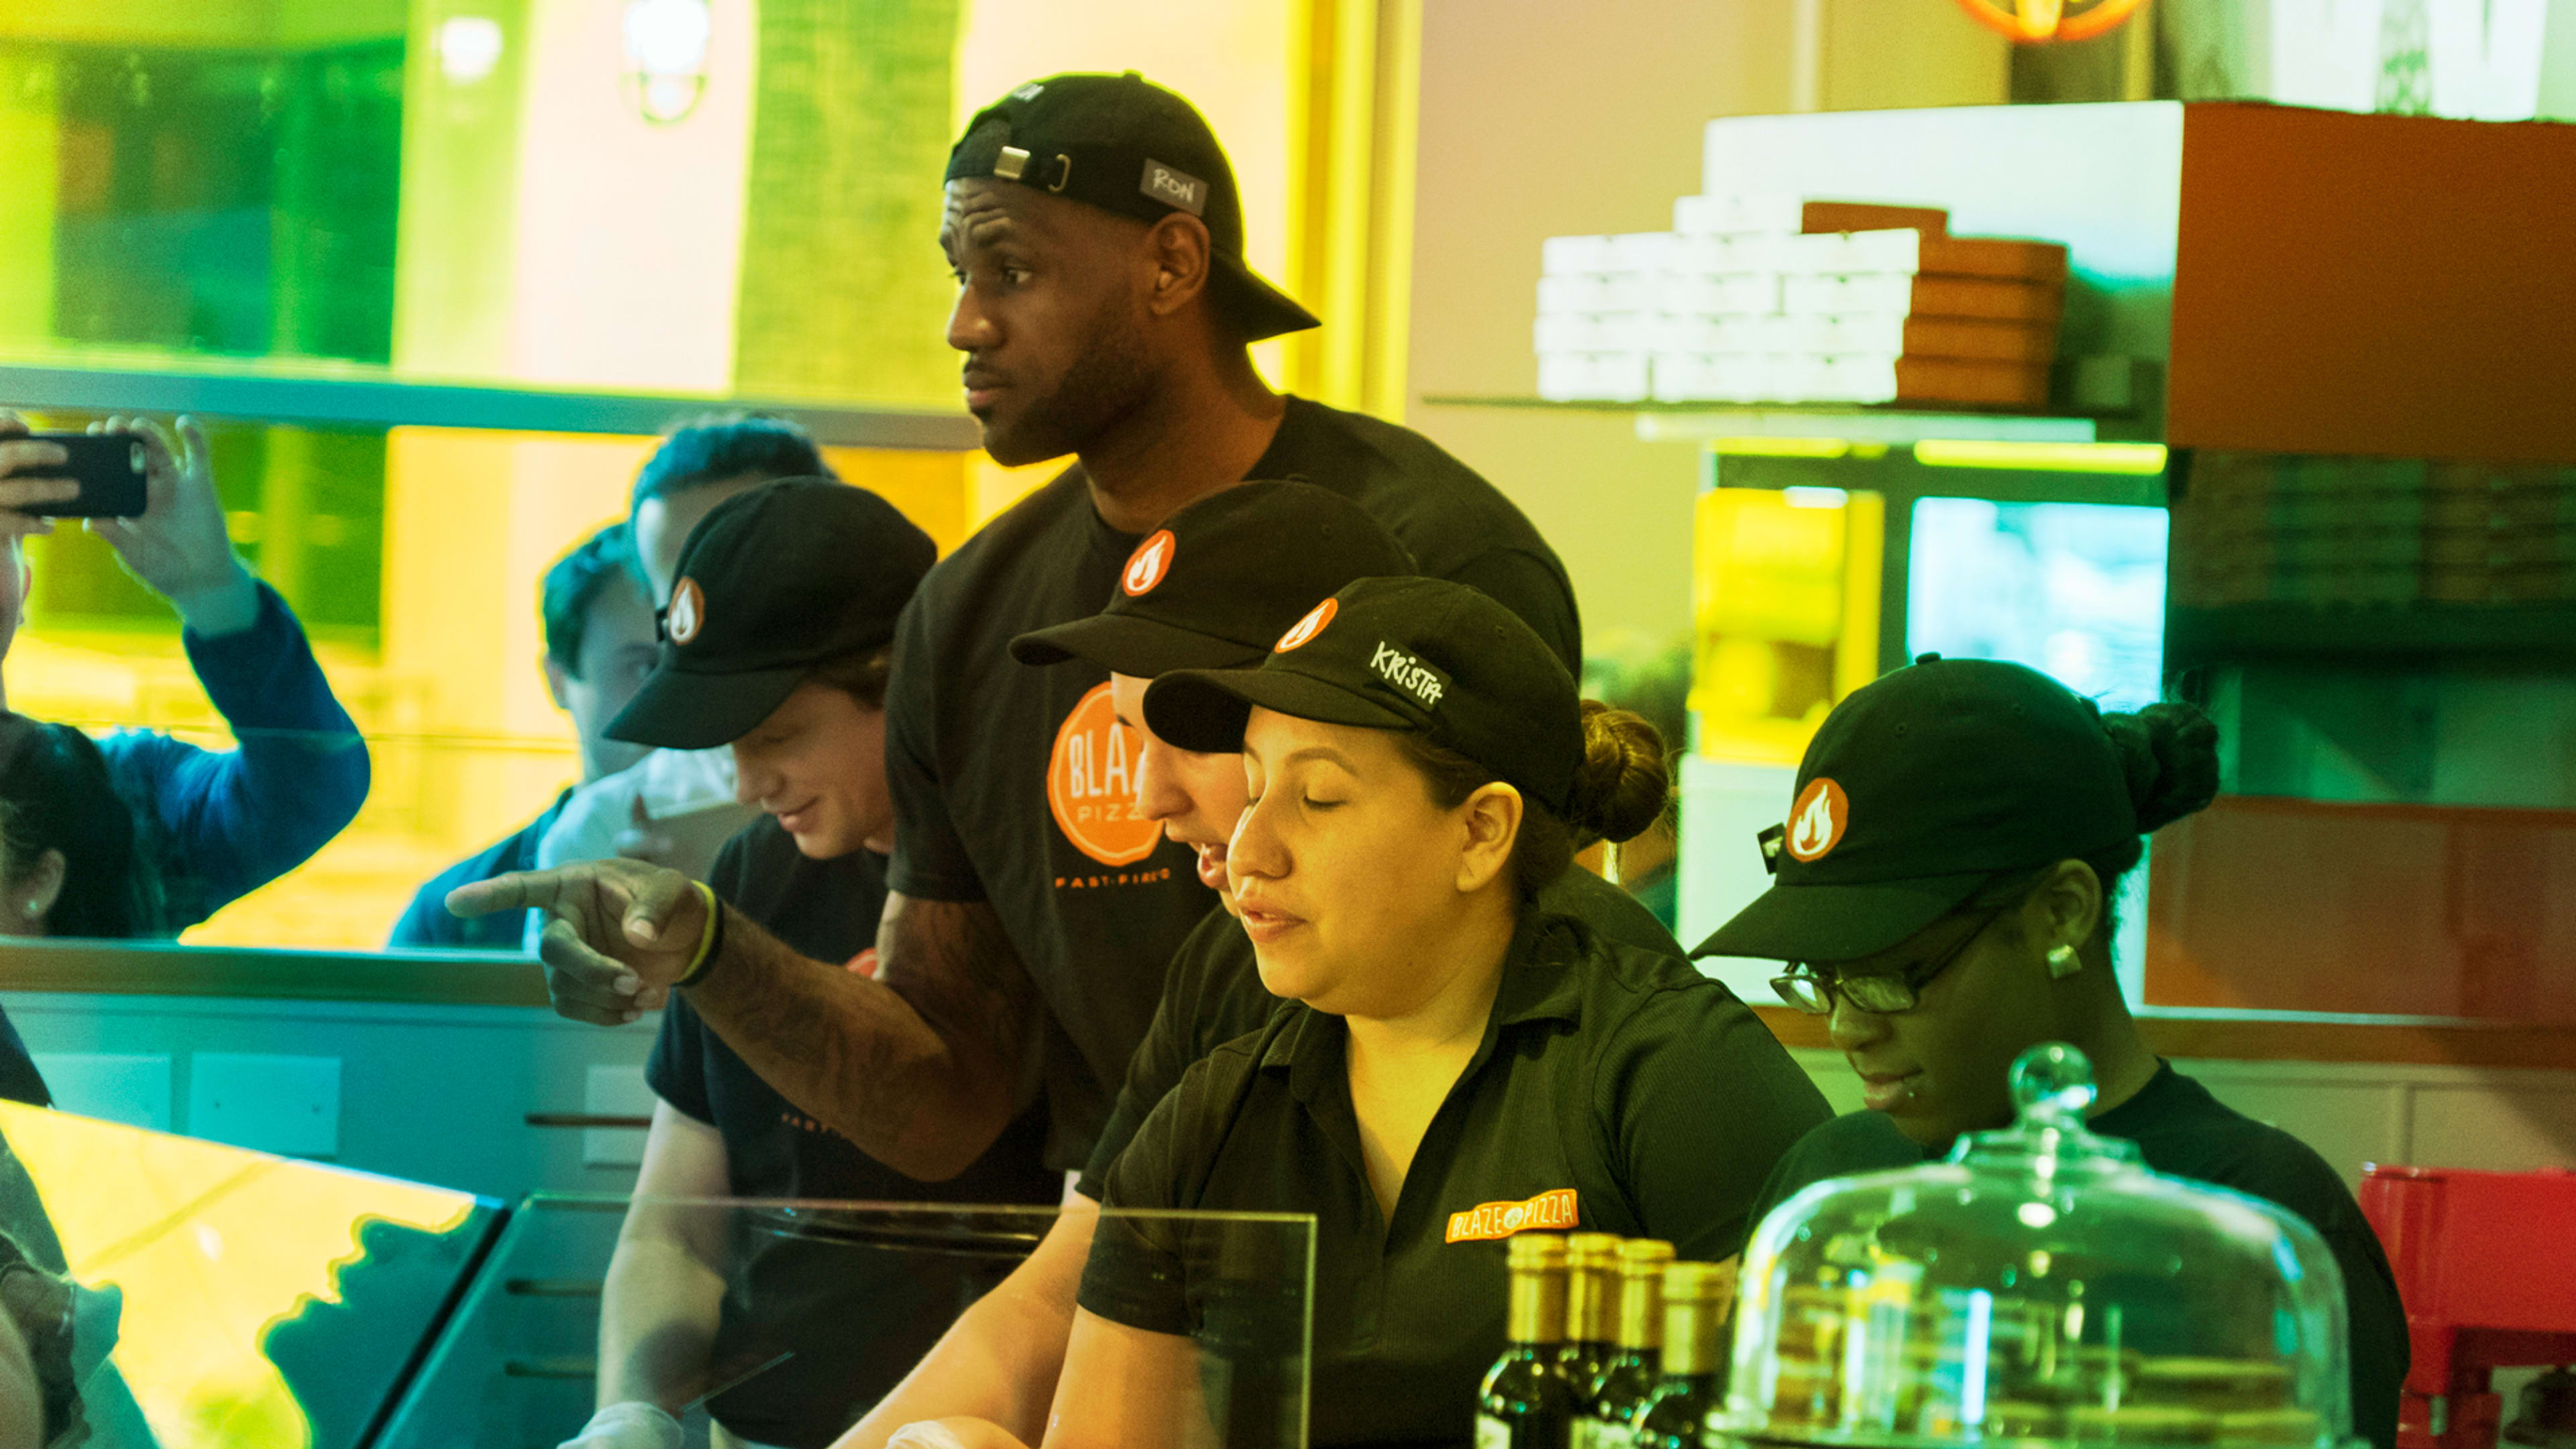 LeBron James on Blaze Pizza and how it’s the key to understanding his own brand strategy